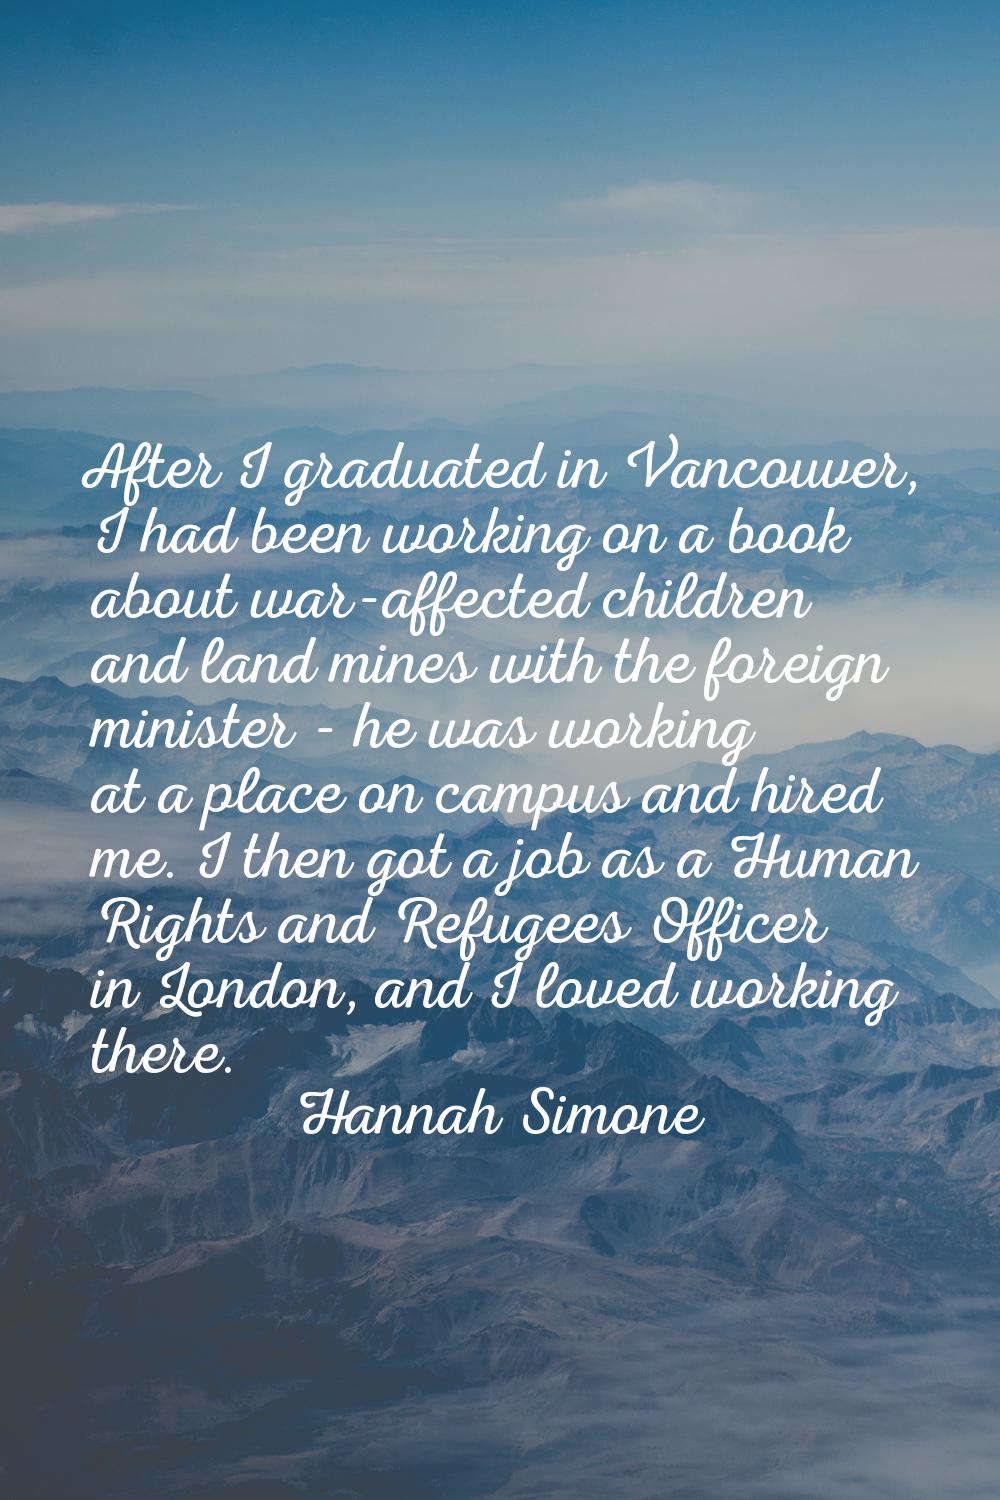 After I graduated in Vancouver, I had been working on a book about war-affected children and land m